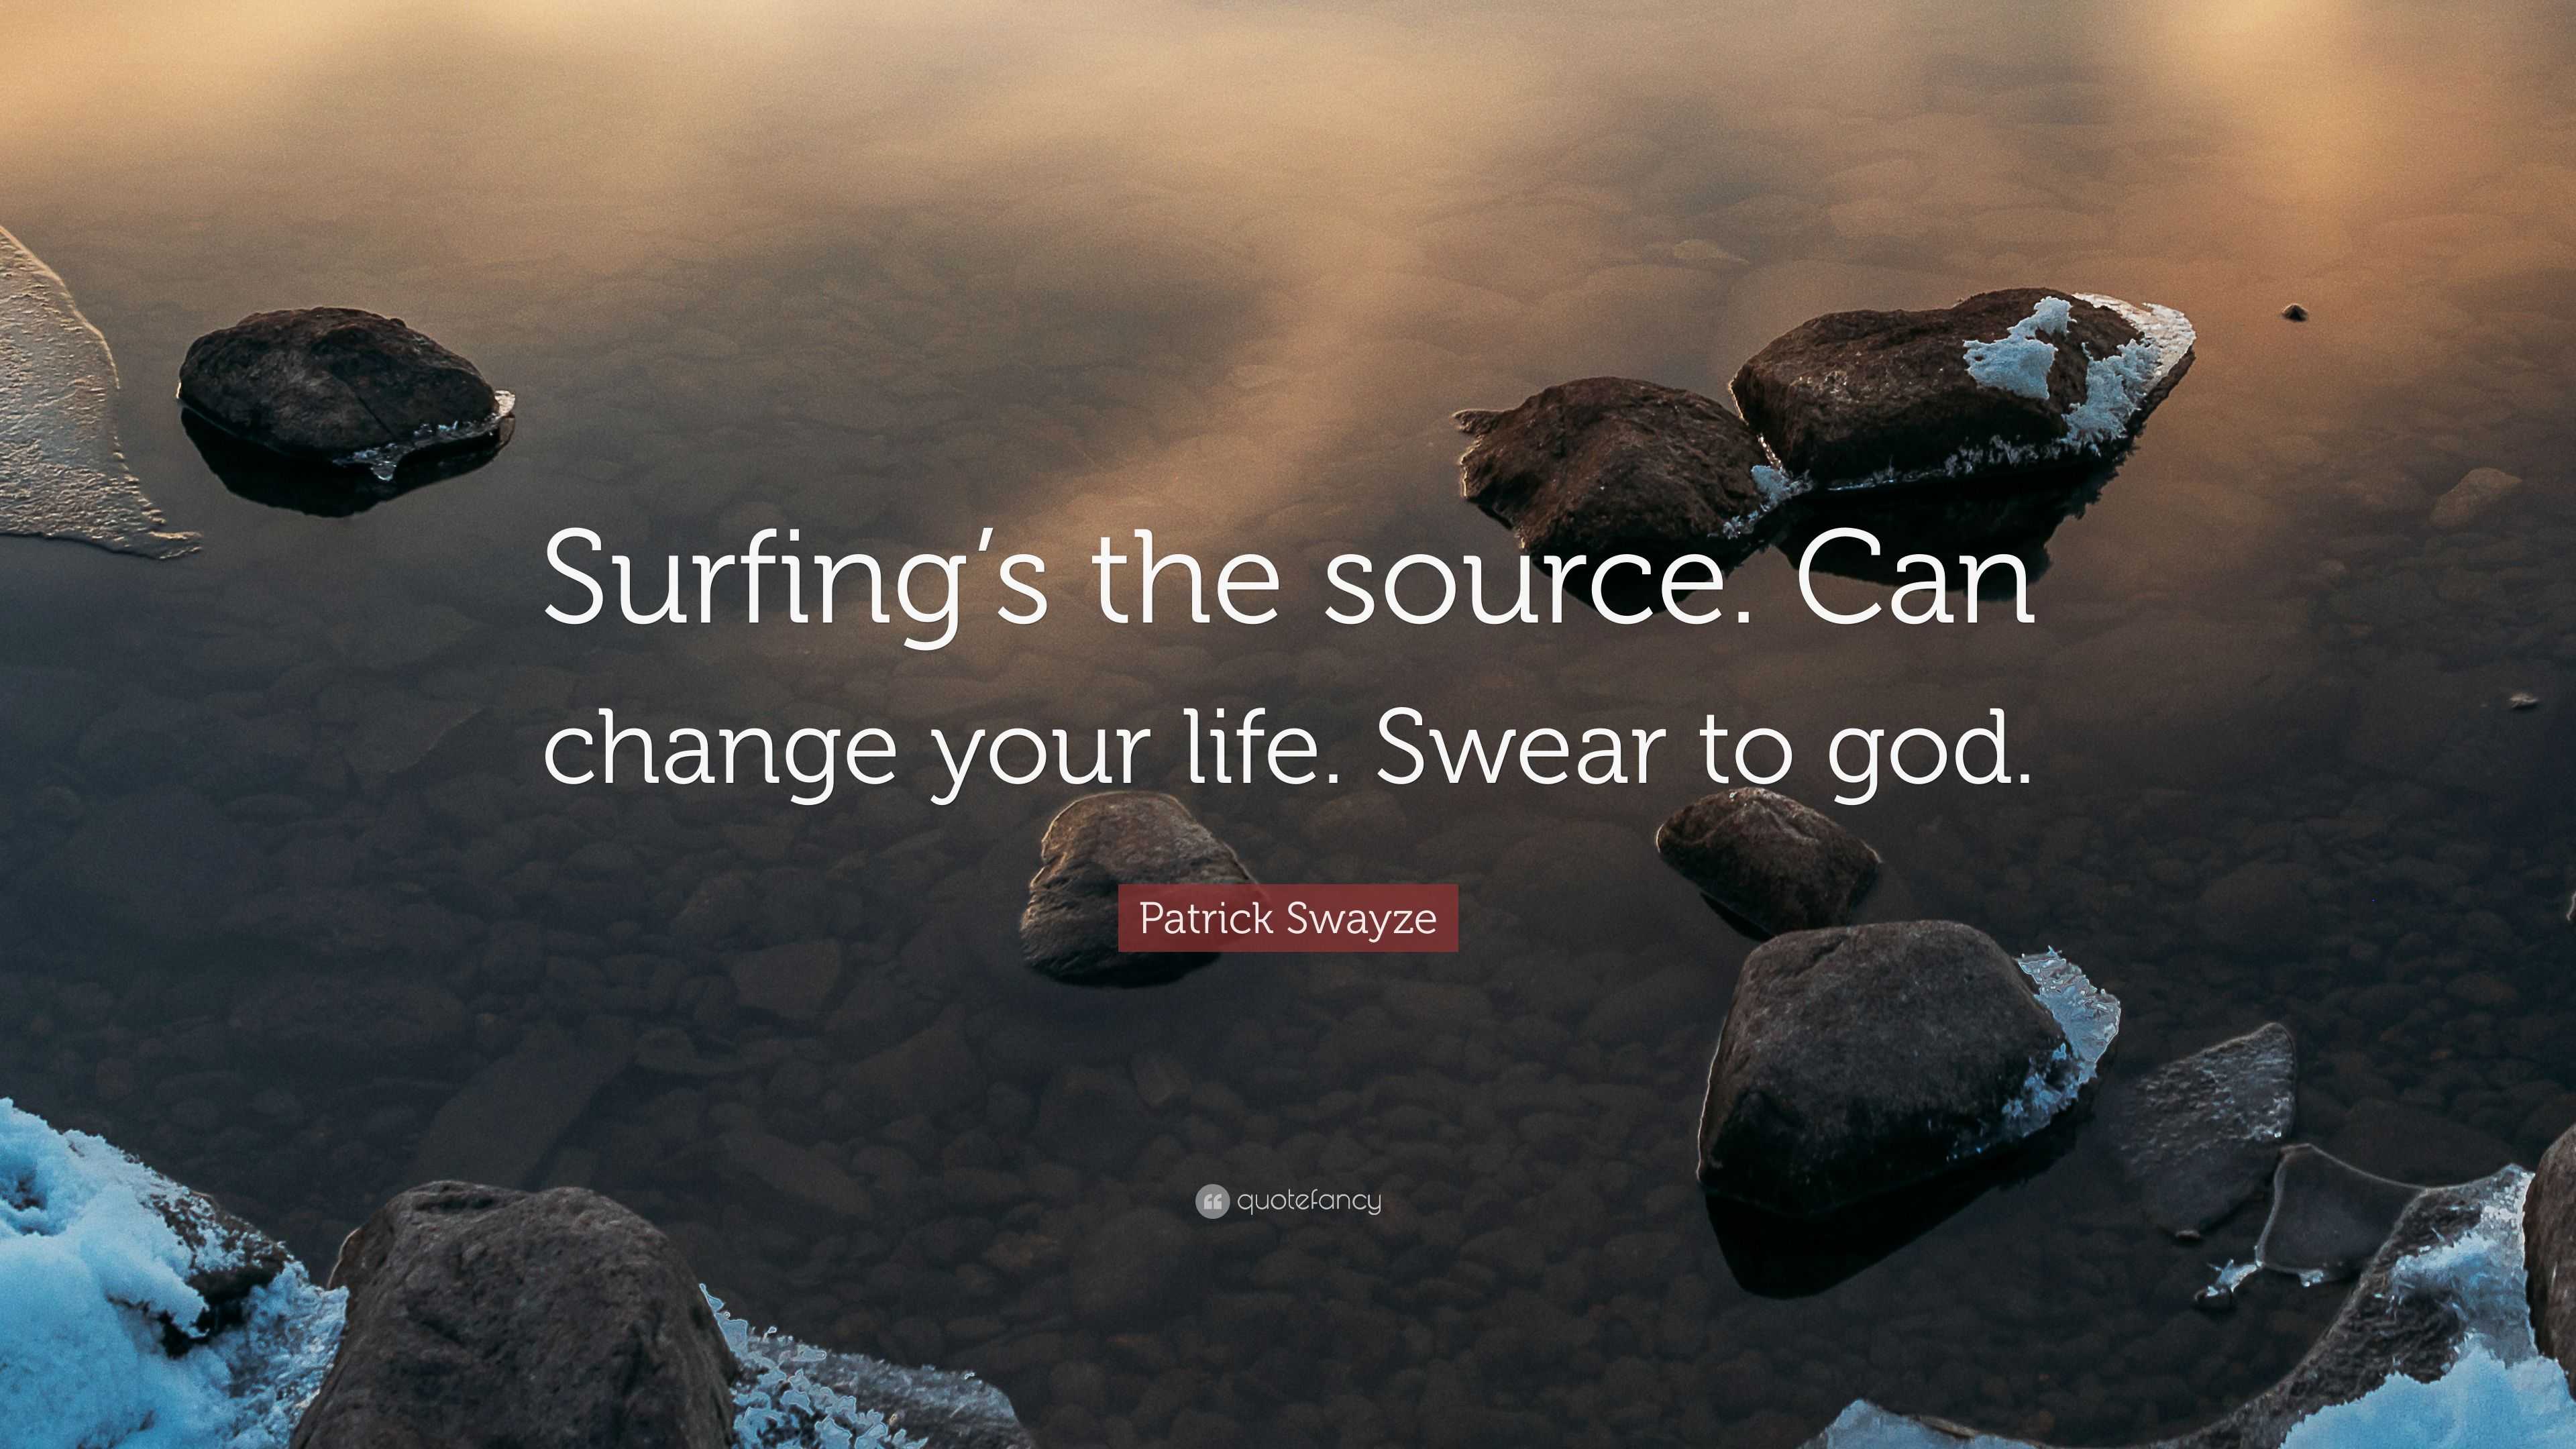 Patrick Swayze Quote “Surfing s the source Can change your life Swear to